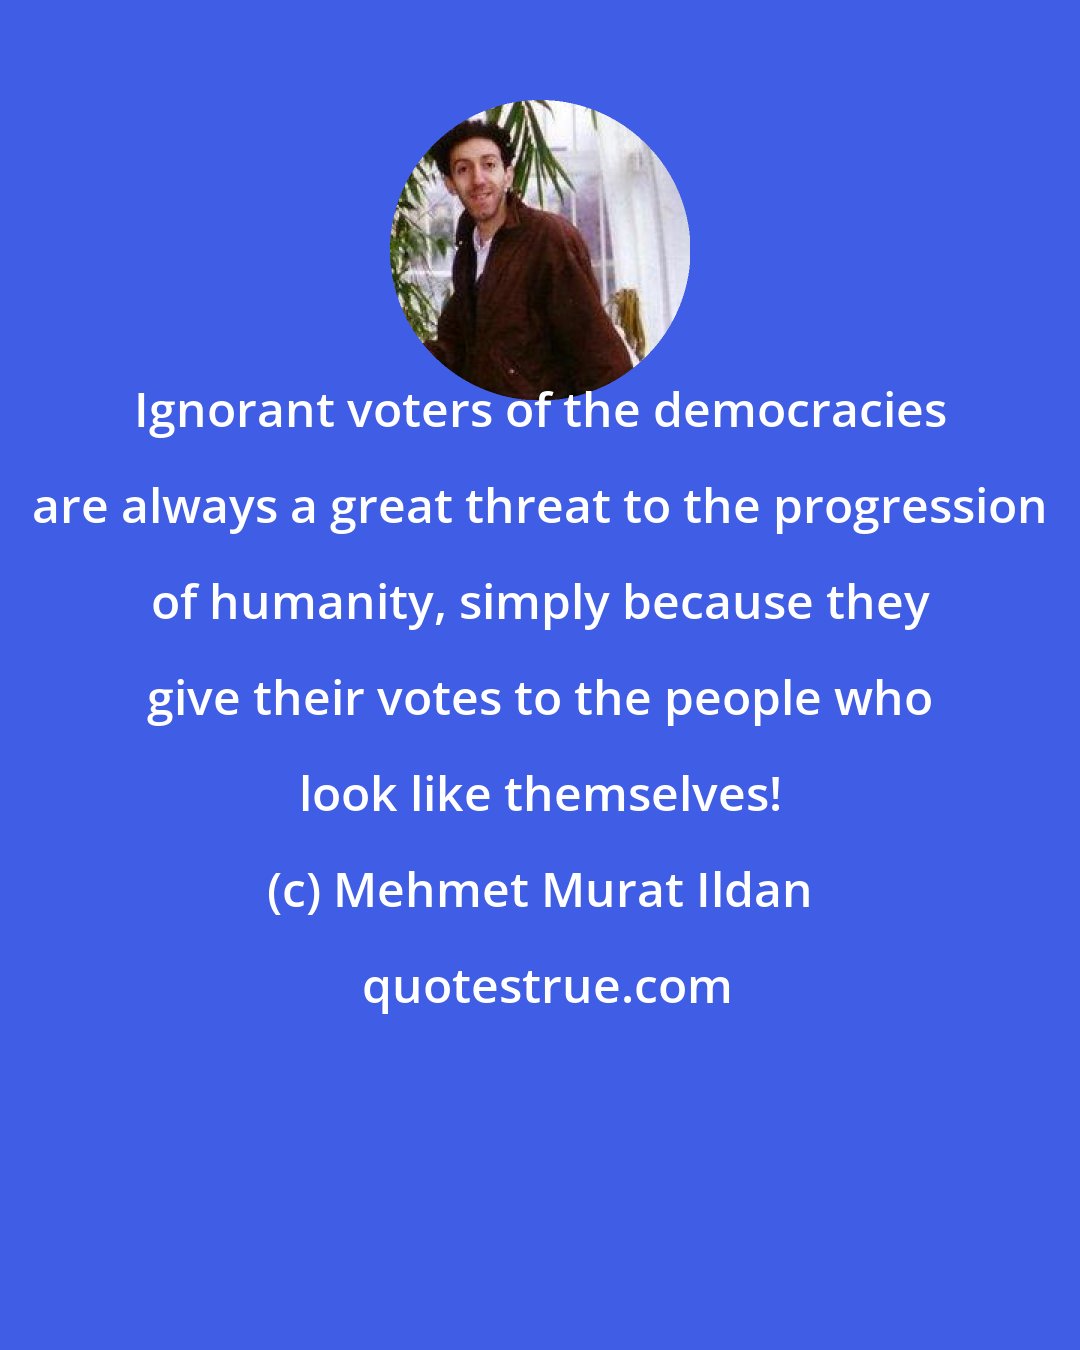 Mehmet Murat Ildan: Ignorant voters of the democracies are always a great threat to the progression of humanity, simply because they give their votes to the people who look like themselves!